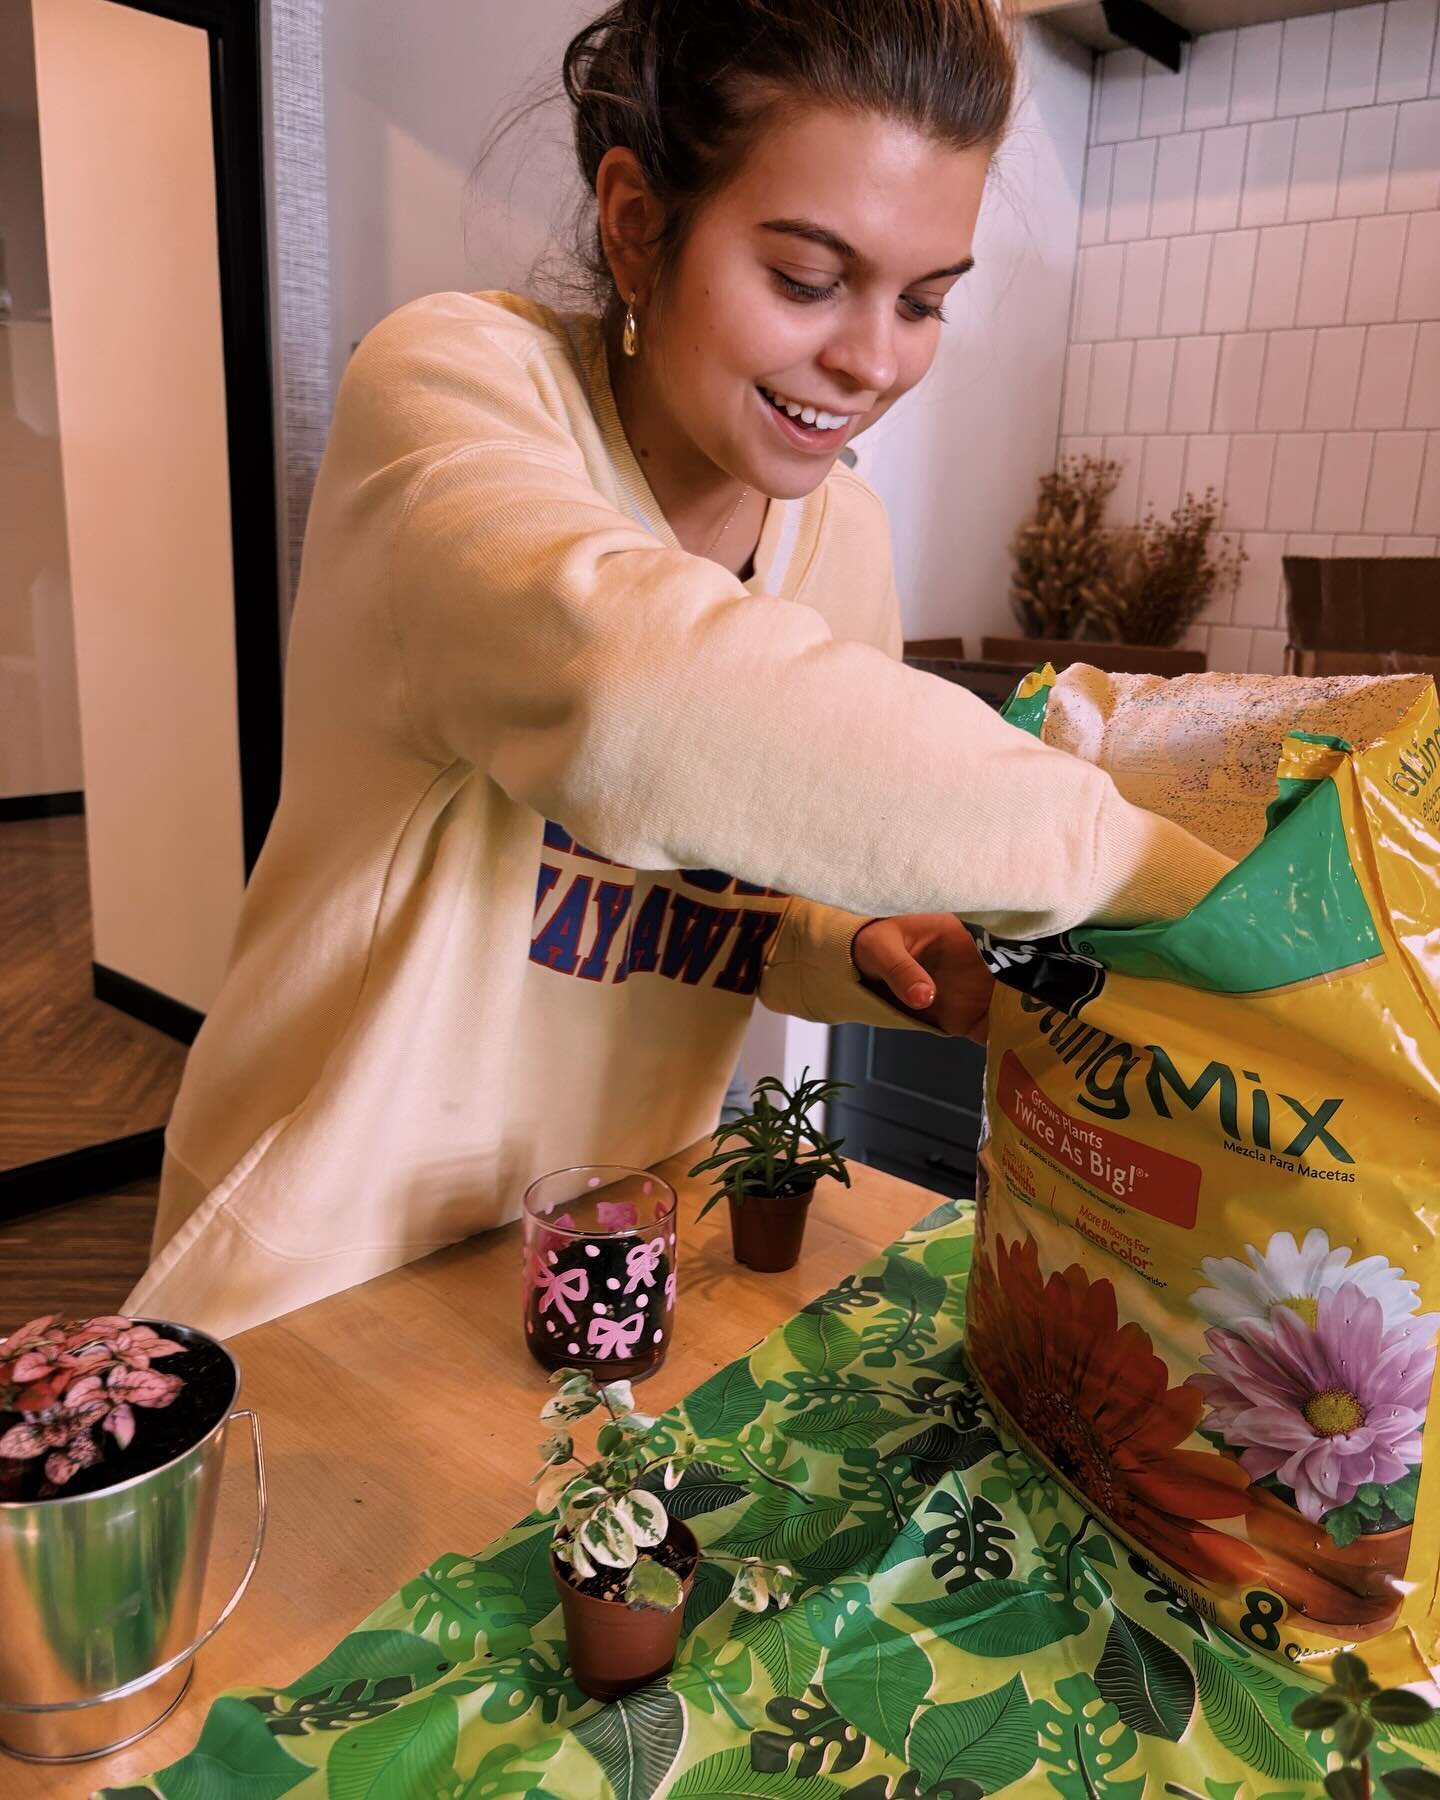 Plant workshop with our proxi residents🌷

In case you missed our plant workshop, mark your calendar for April 12th  we are having a bouquet bar 💐